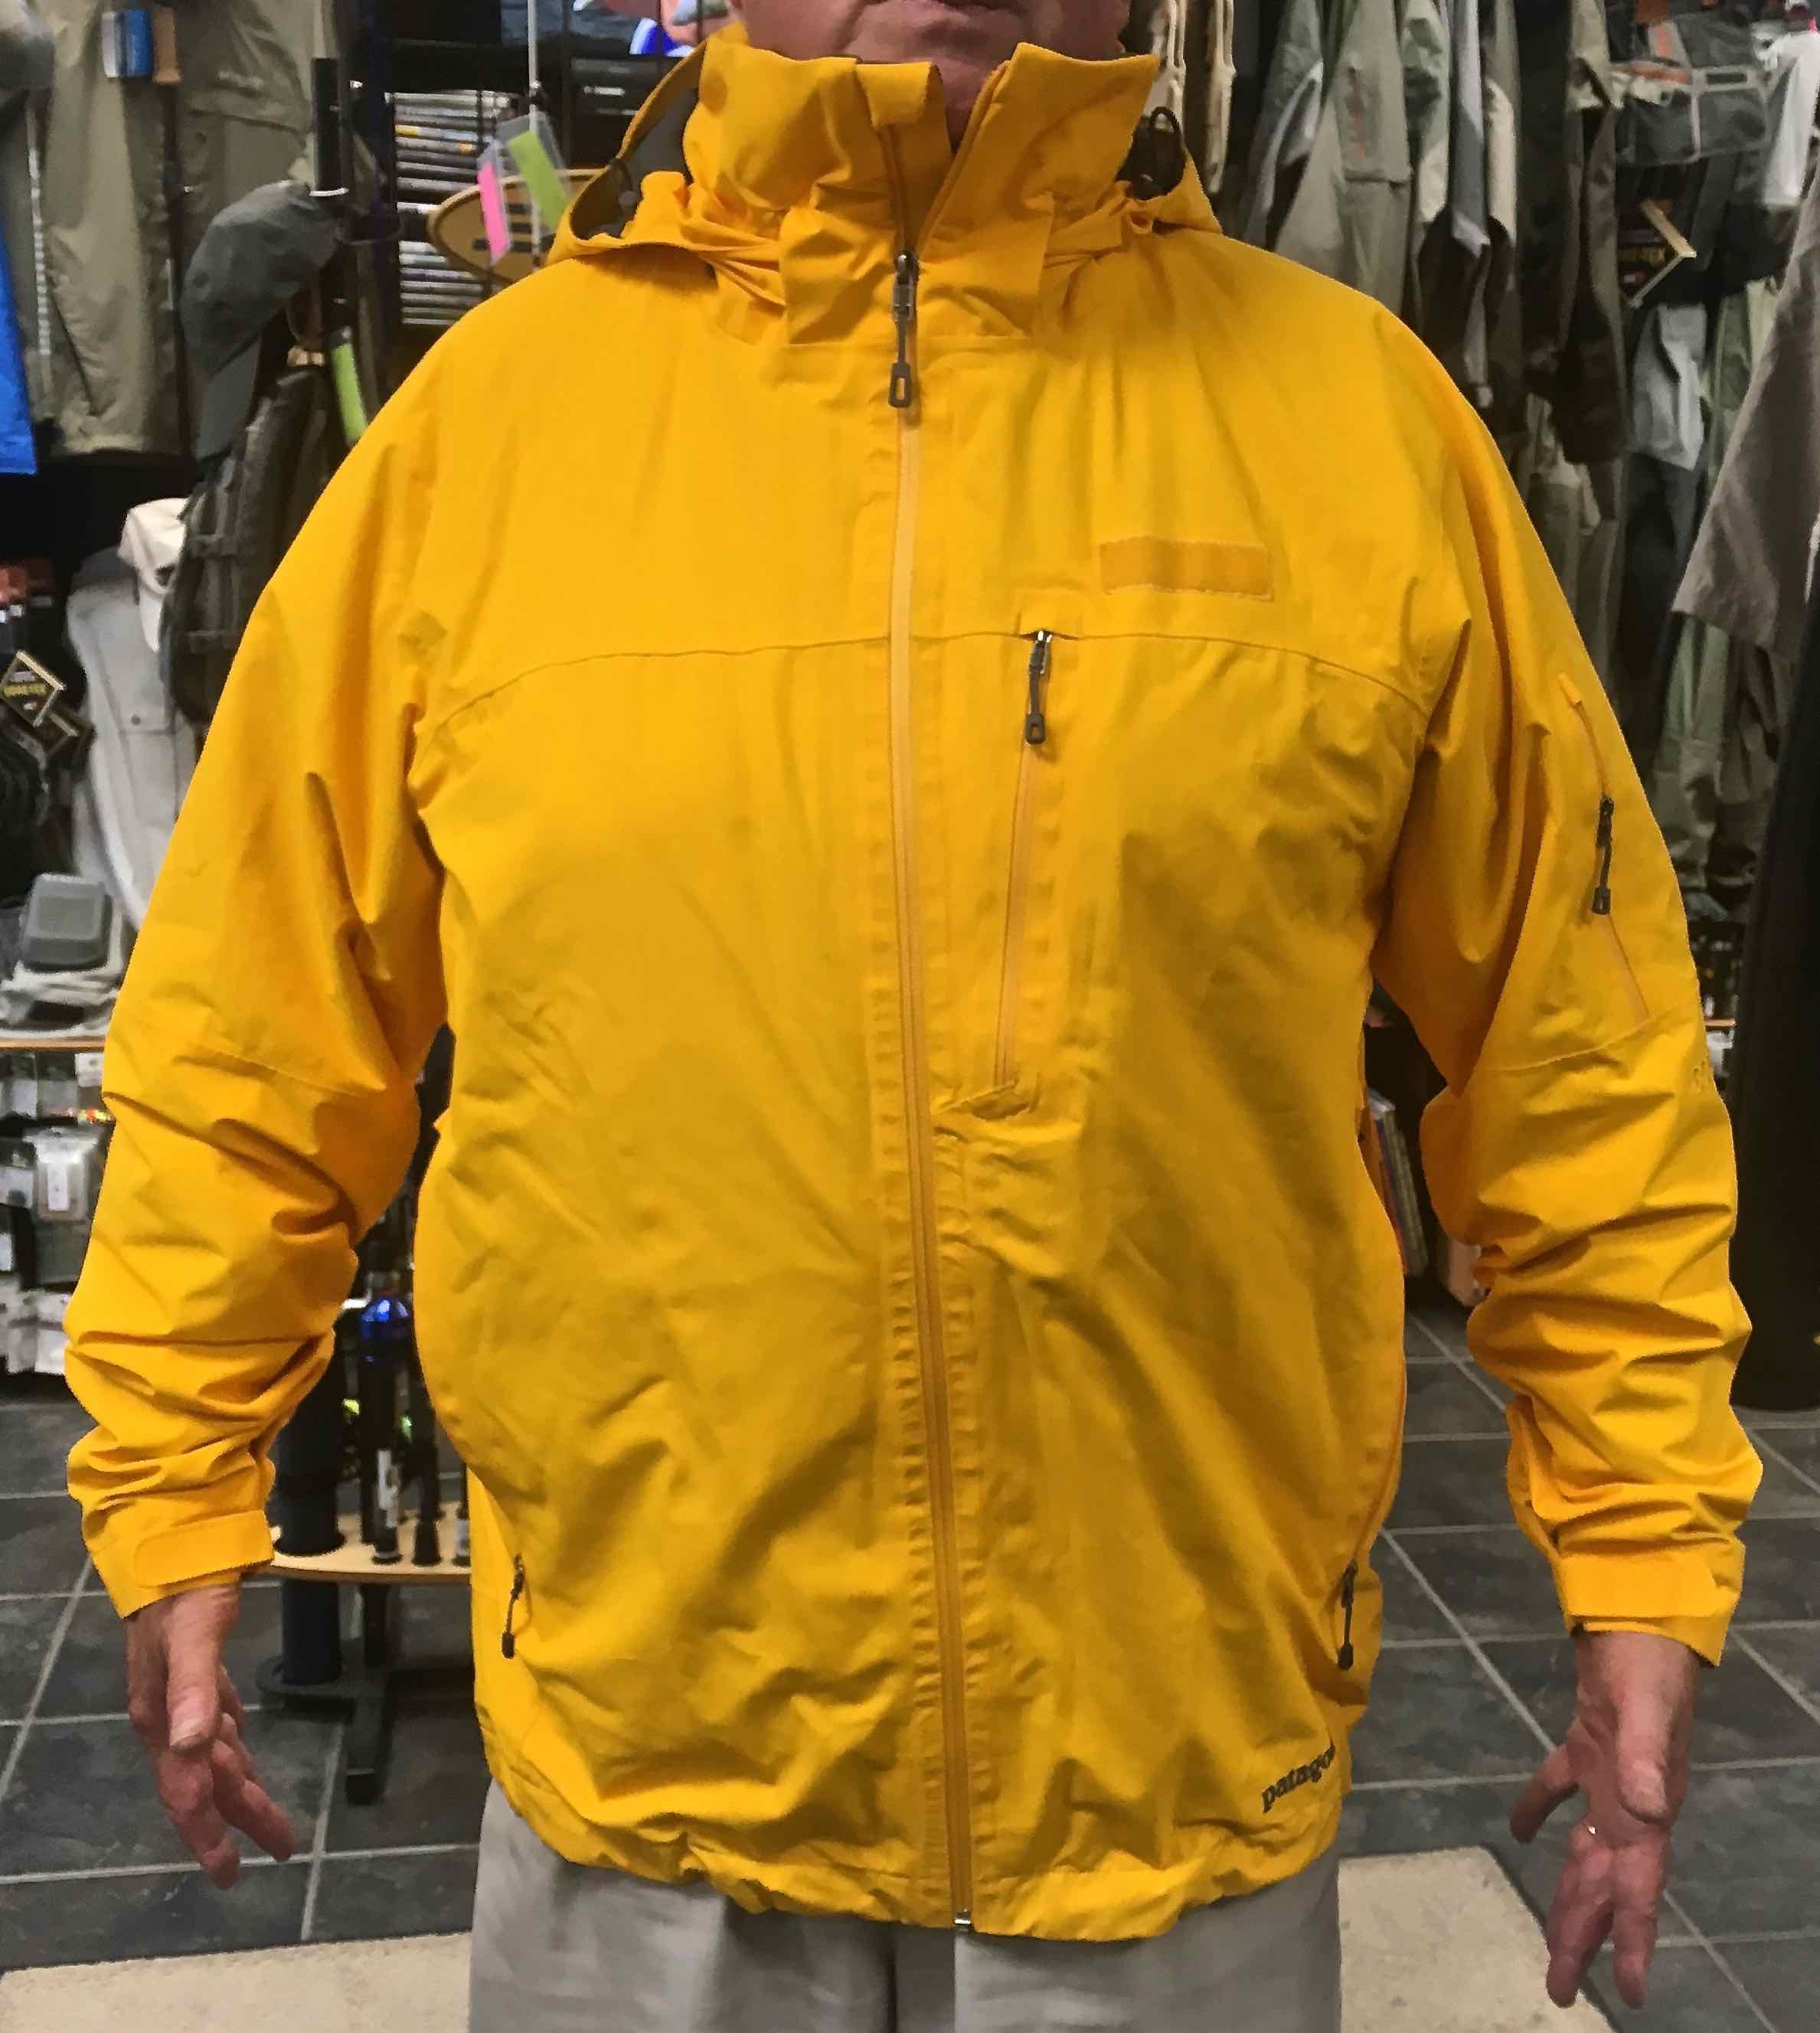 https://thefirstcast.ca/wp-content/uploads/2016/07/Patagonia-PATAGONIA-MENS-PRIMO-JACKET-Yellow-Goretex-Jacket-embedded-RECCO-AA.jpg